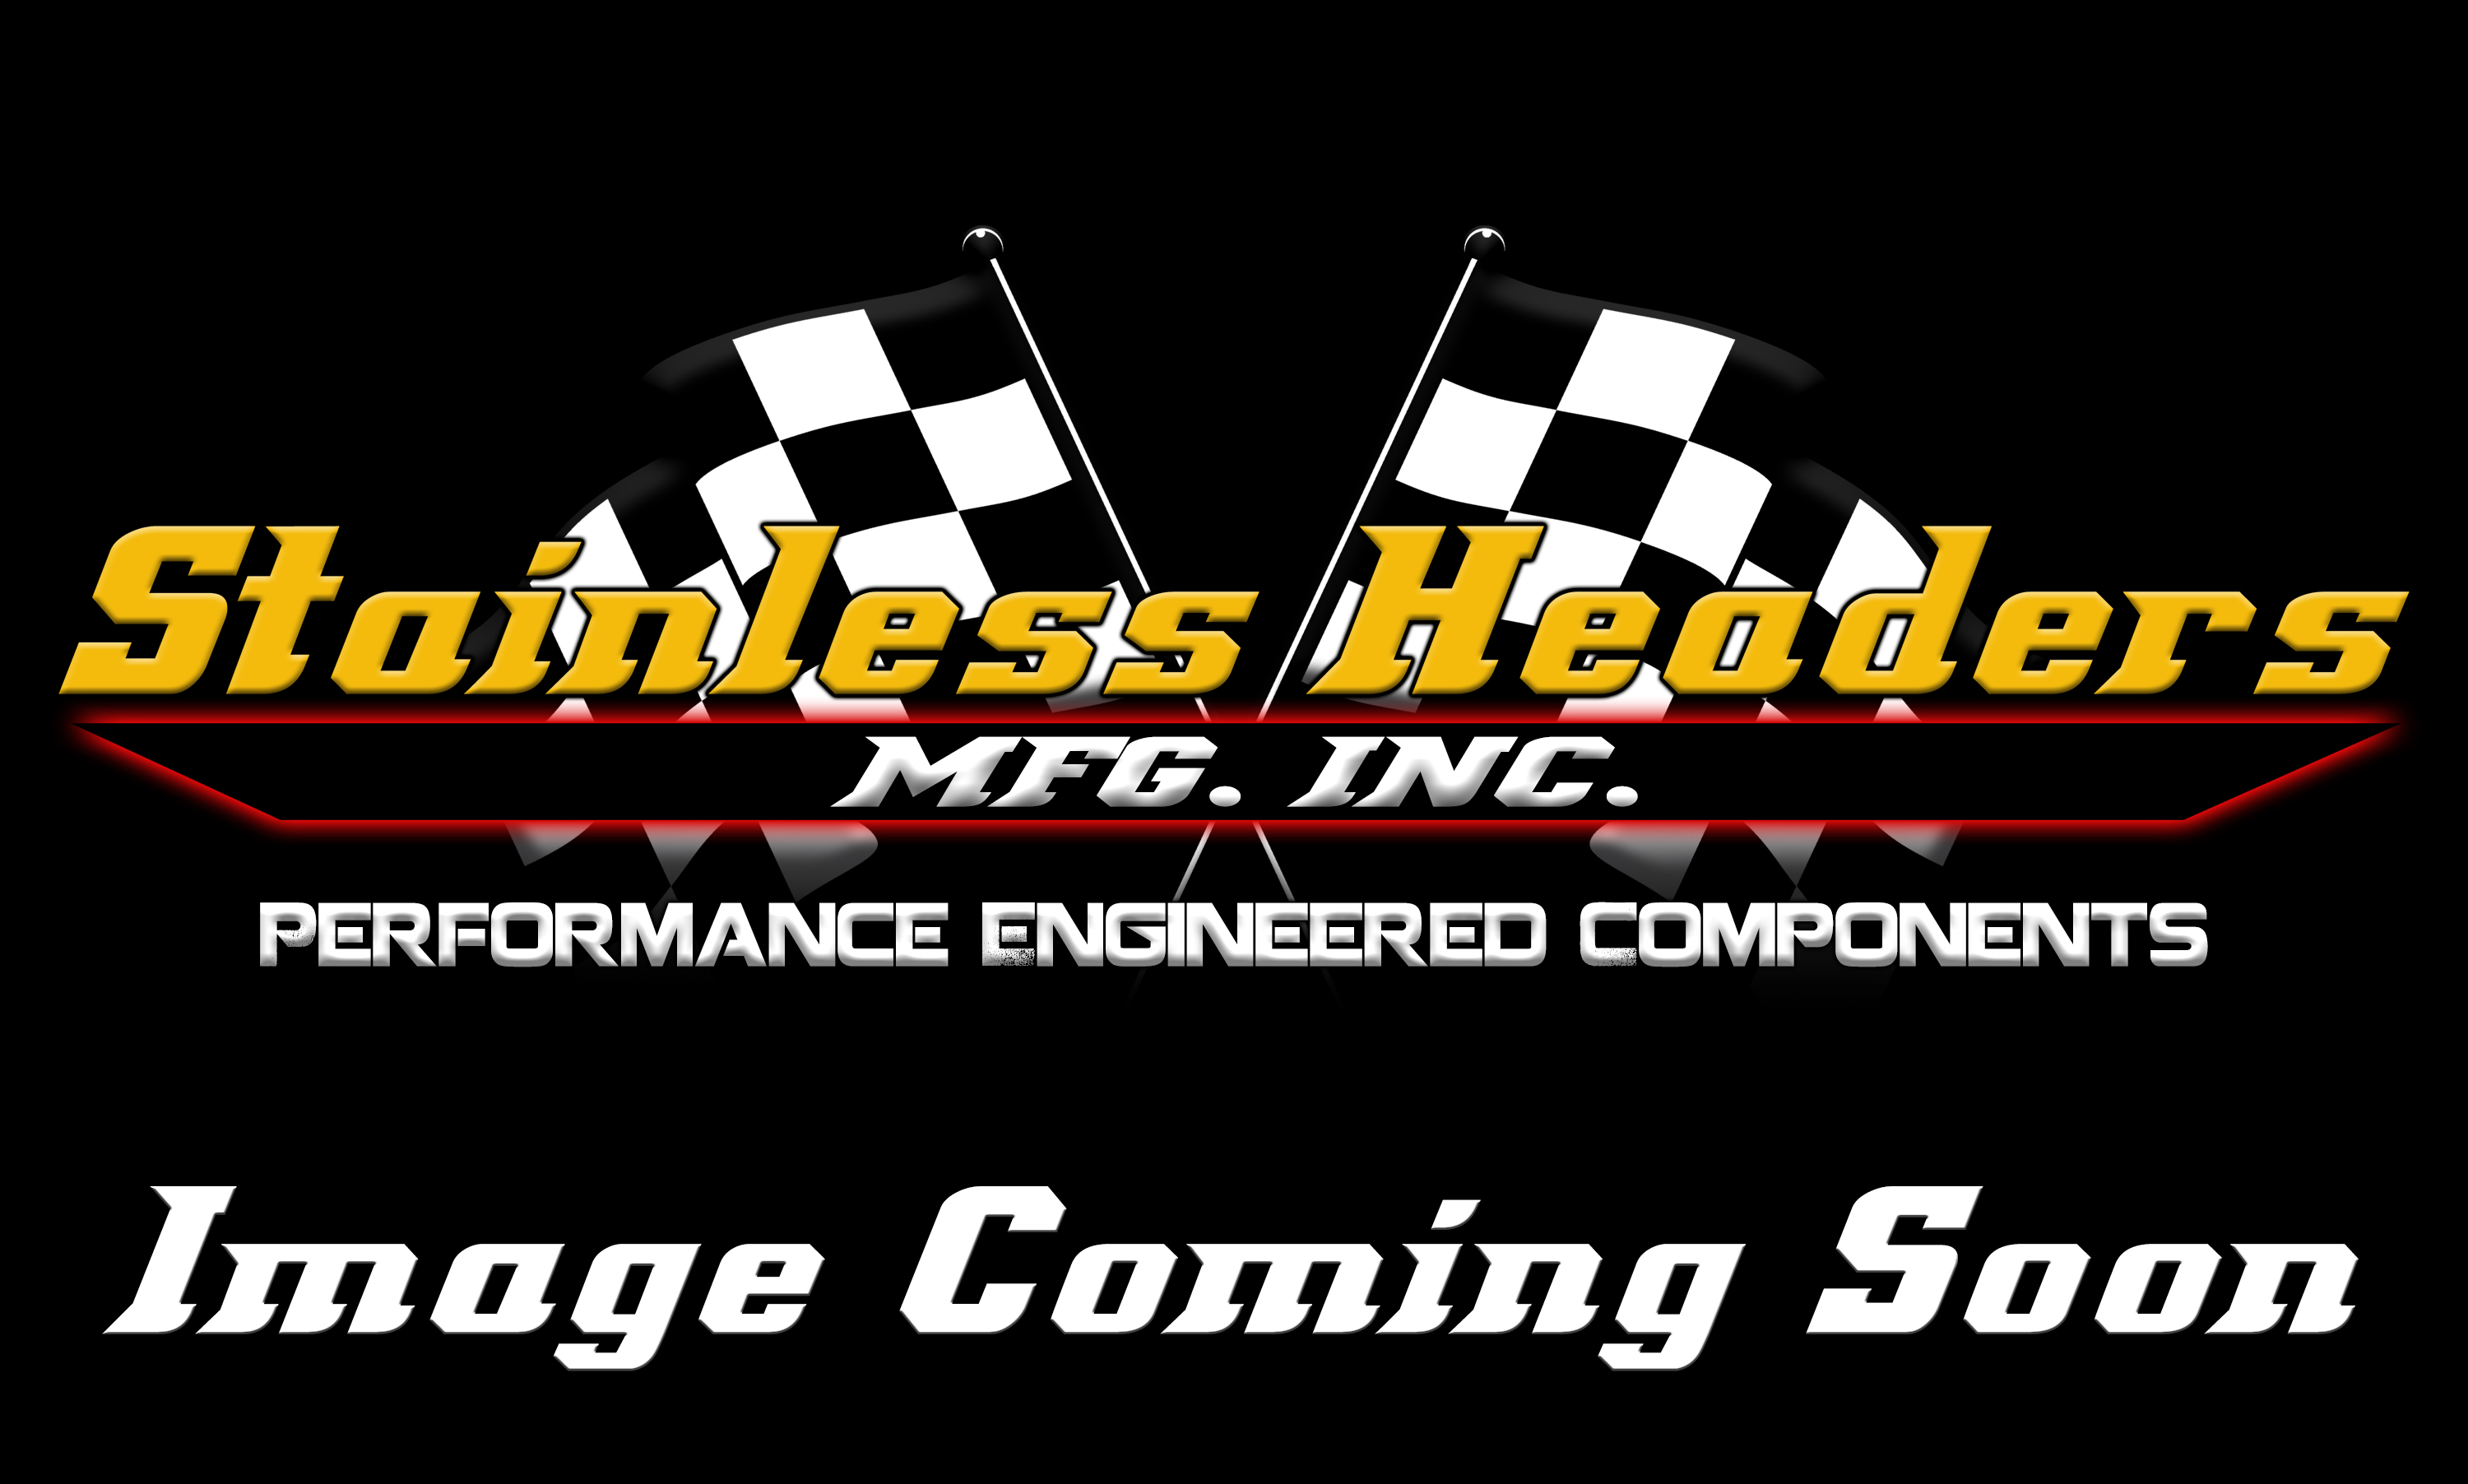 CompTurbo Technologies - CTR4276R-7685 Mid Frame Air-Cooled 1.0  Turbocharger (1320 HP)